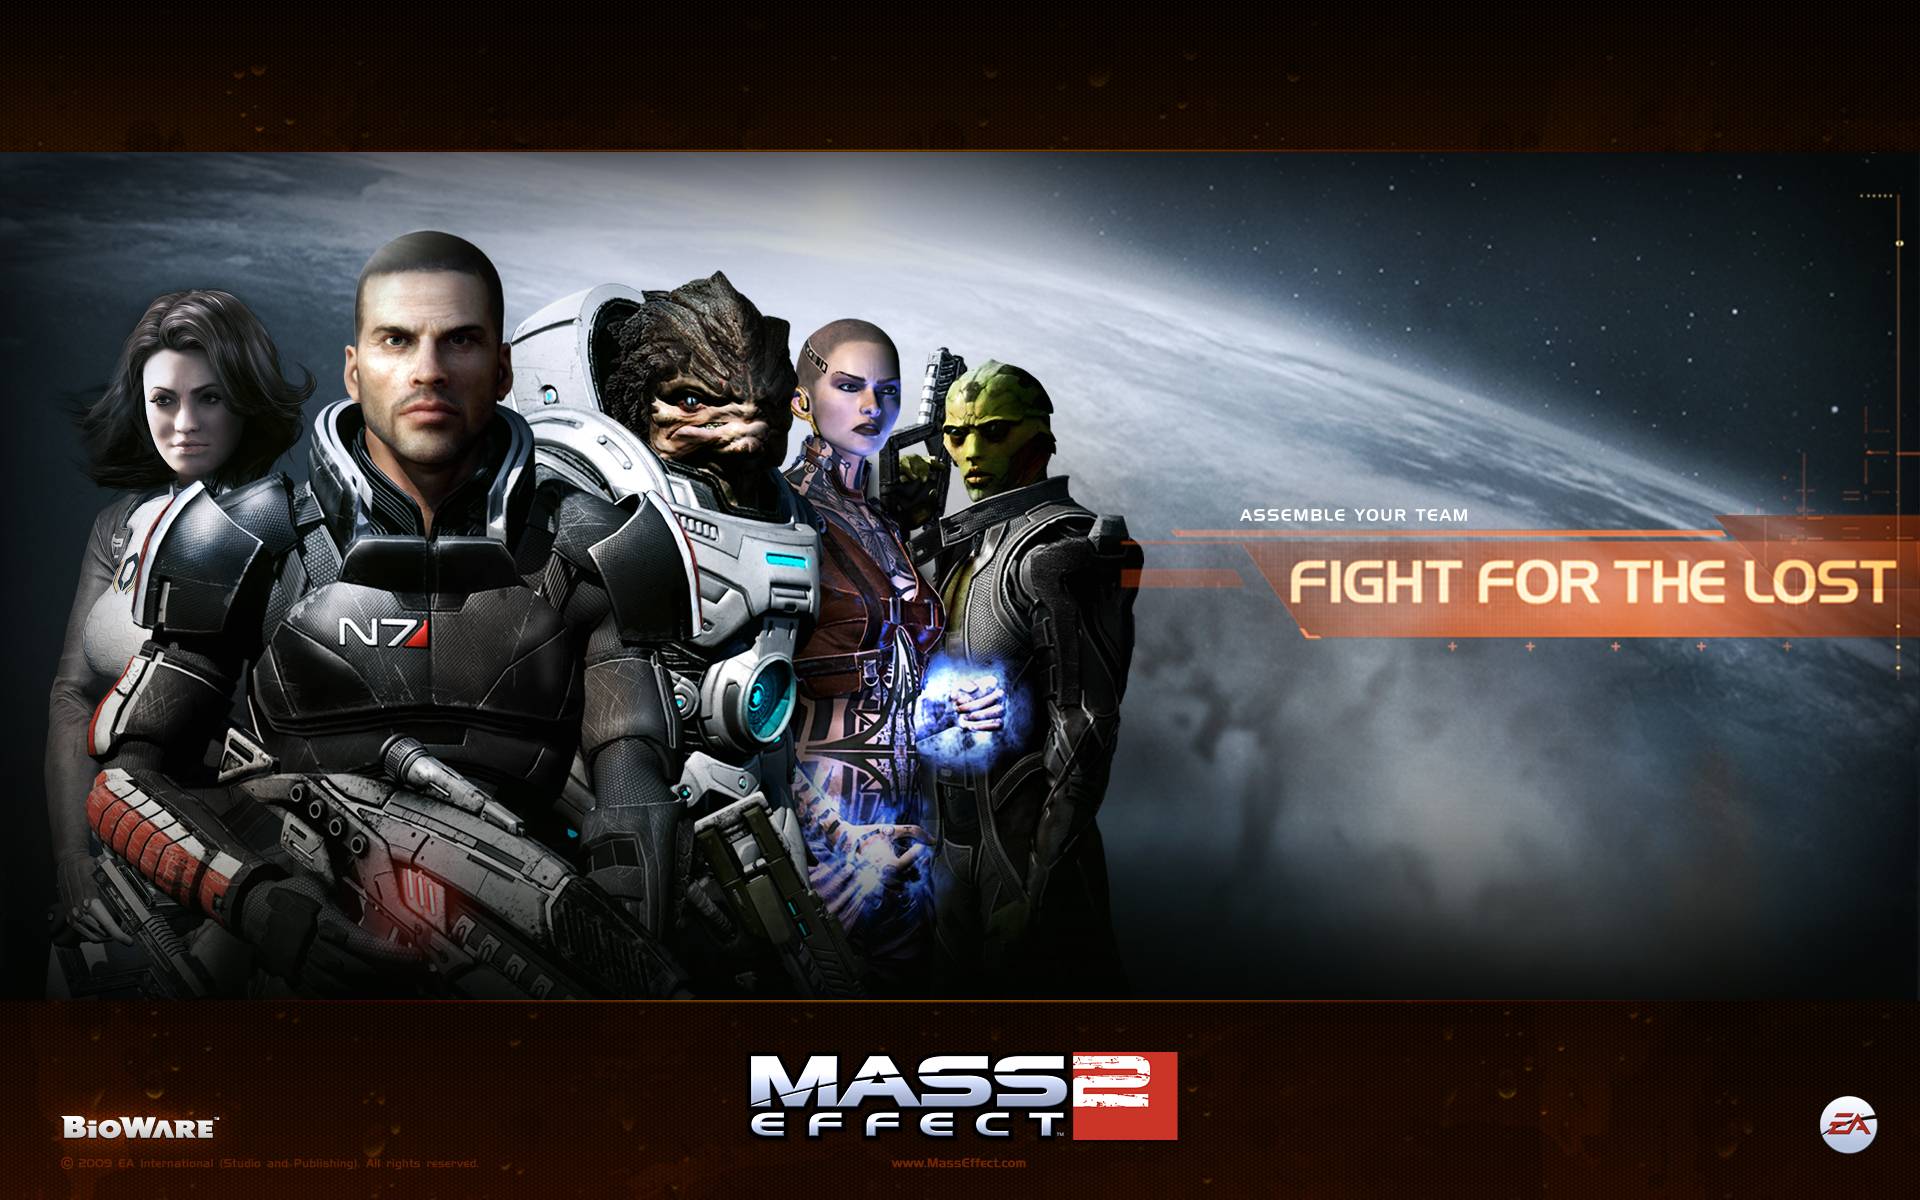 Check Below For Mass Effect Ps3 Wallpaper In 1080p HD And 720p